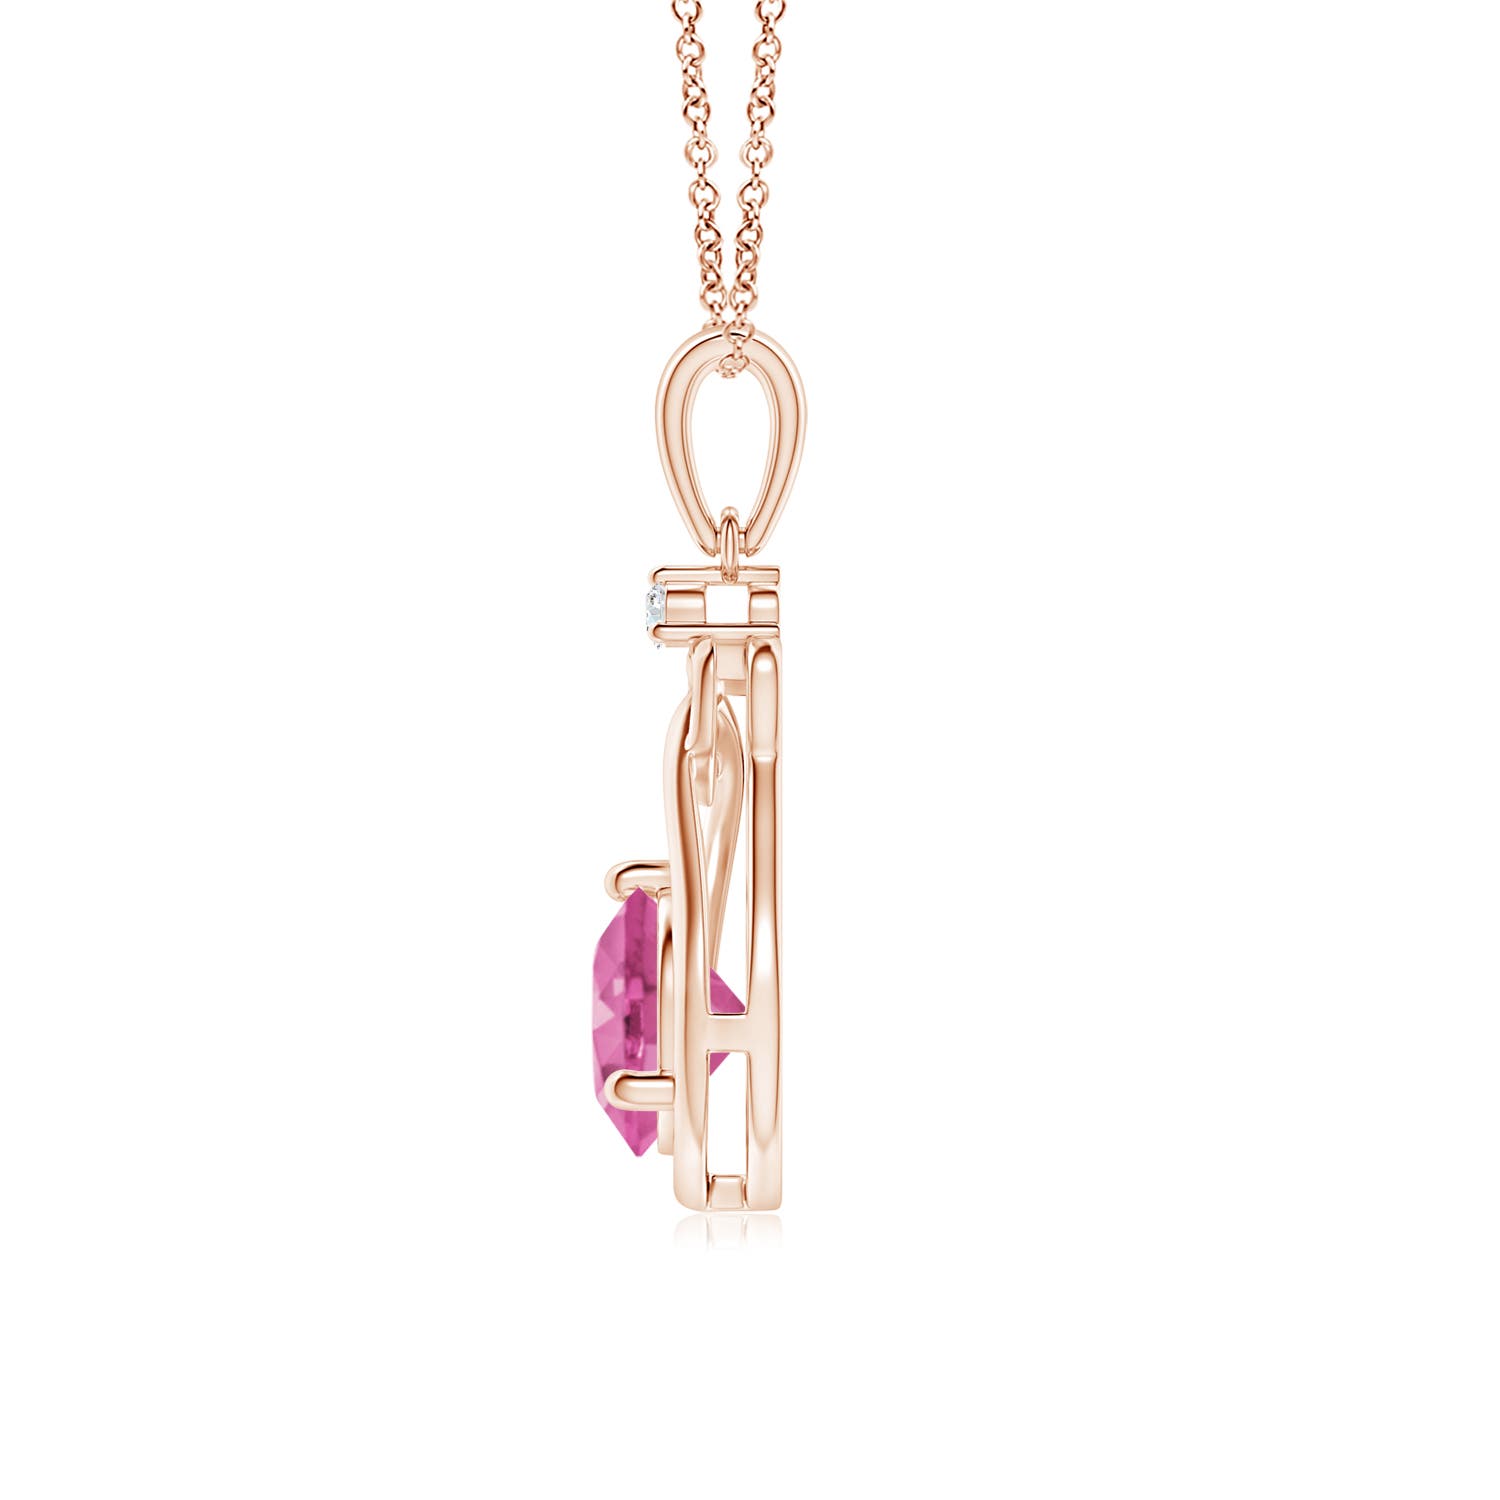 AAA - Pink Sapphire / 1.01 CT / 14 KT Rose Gold